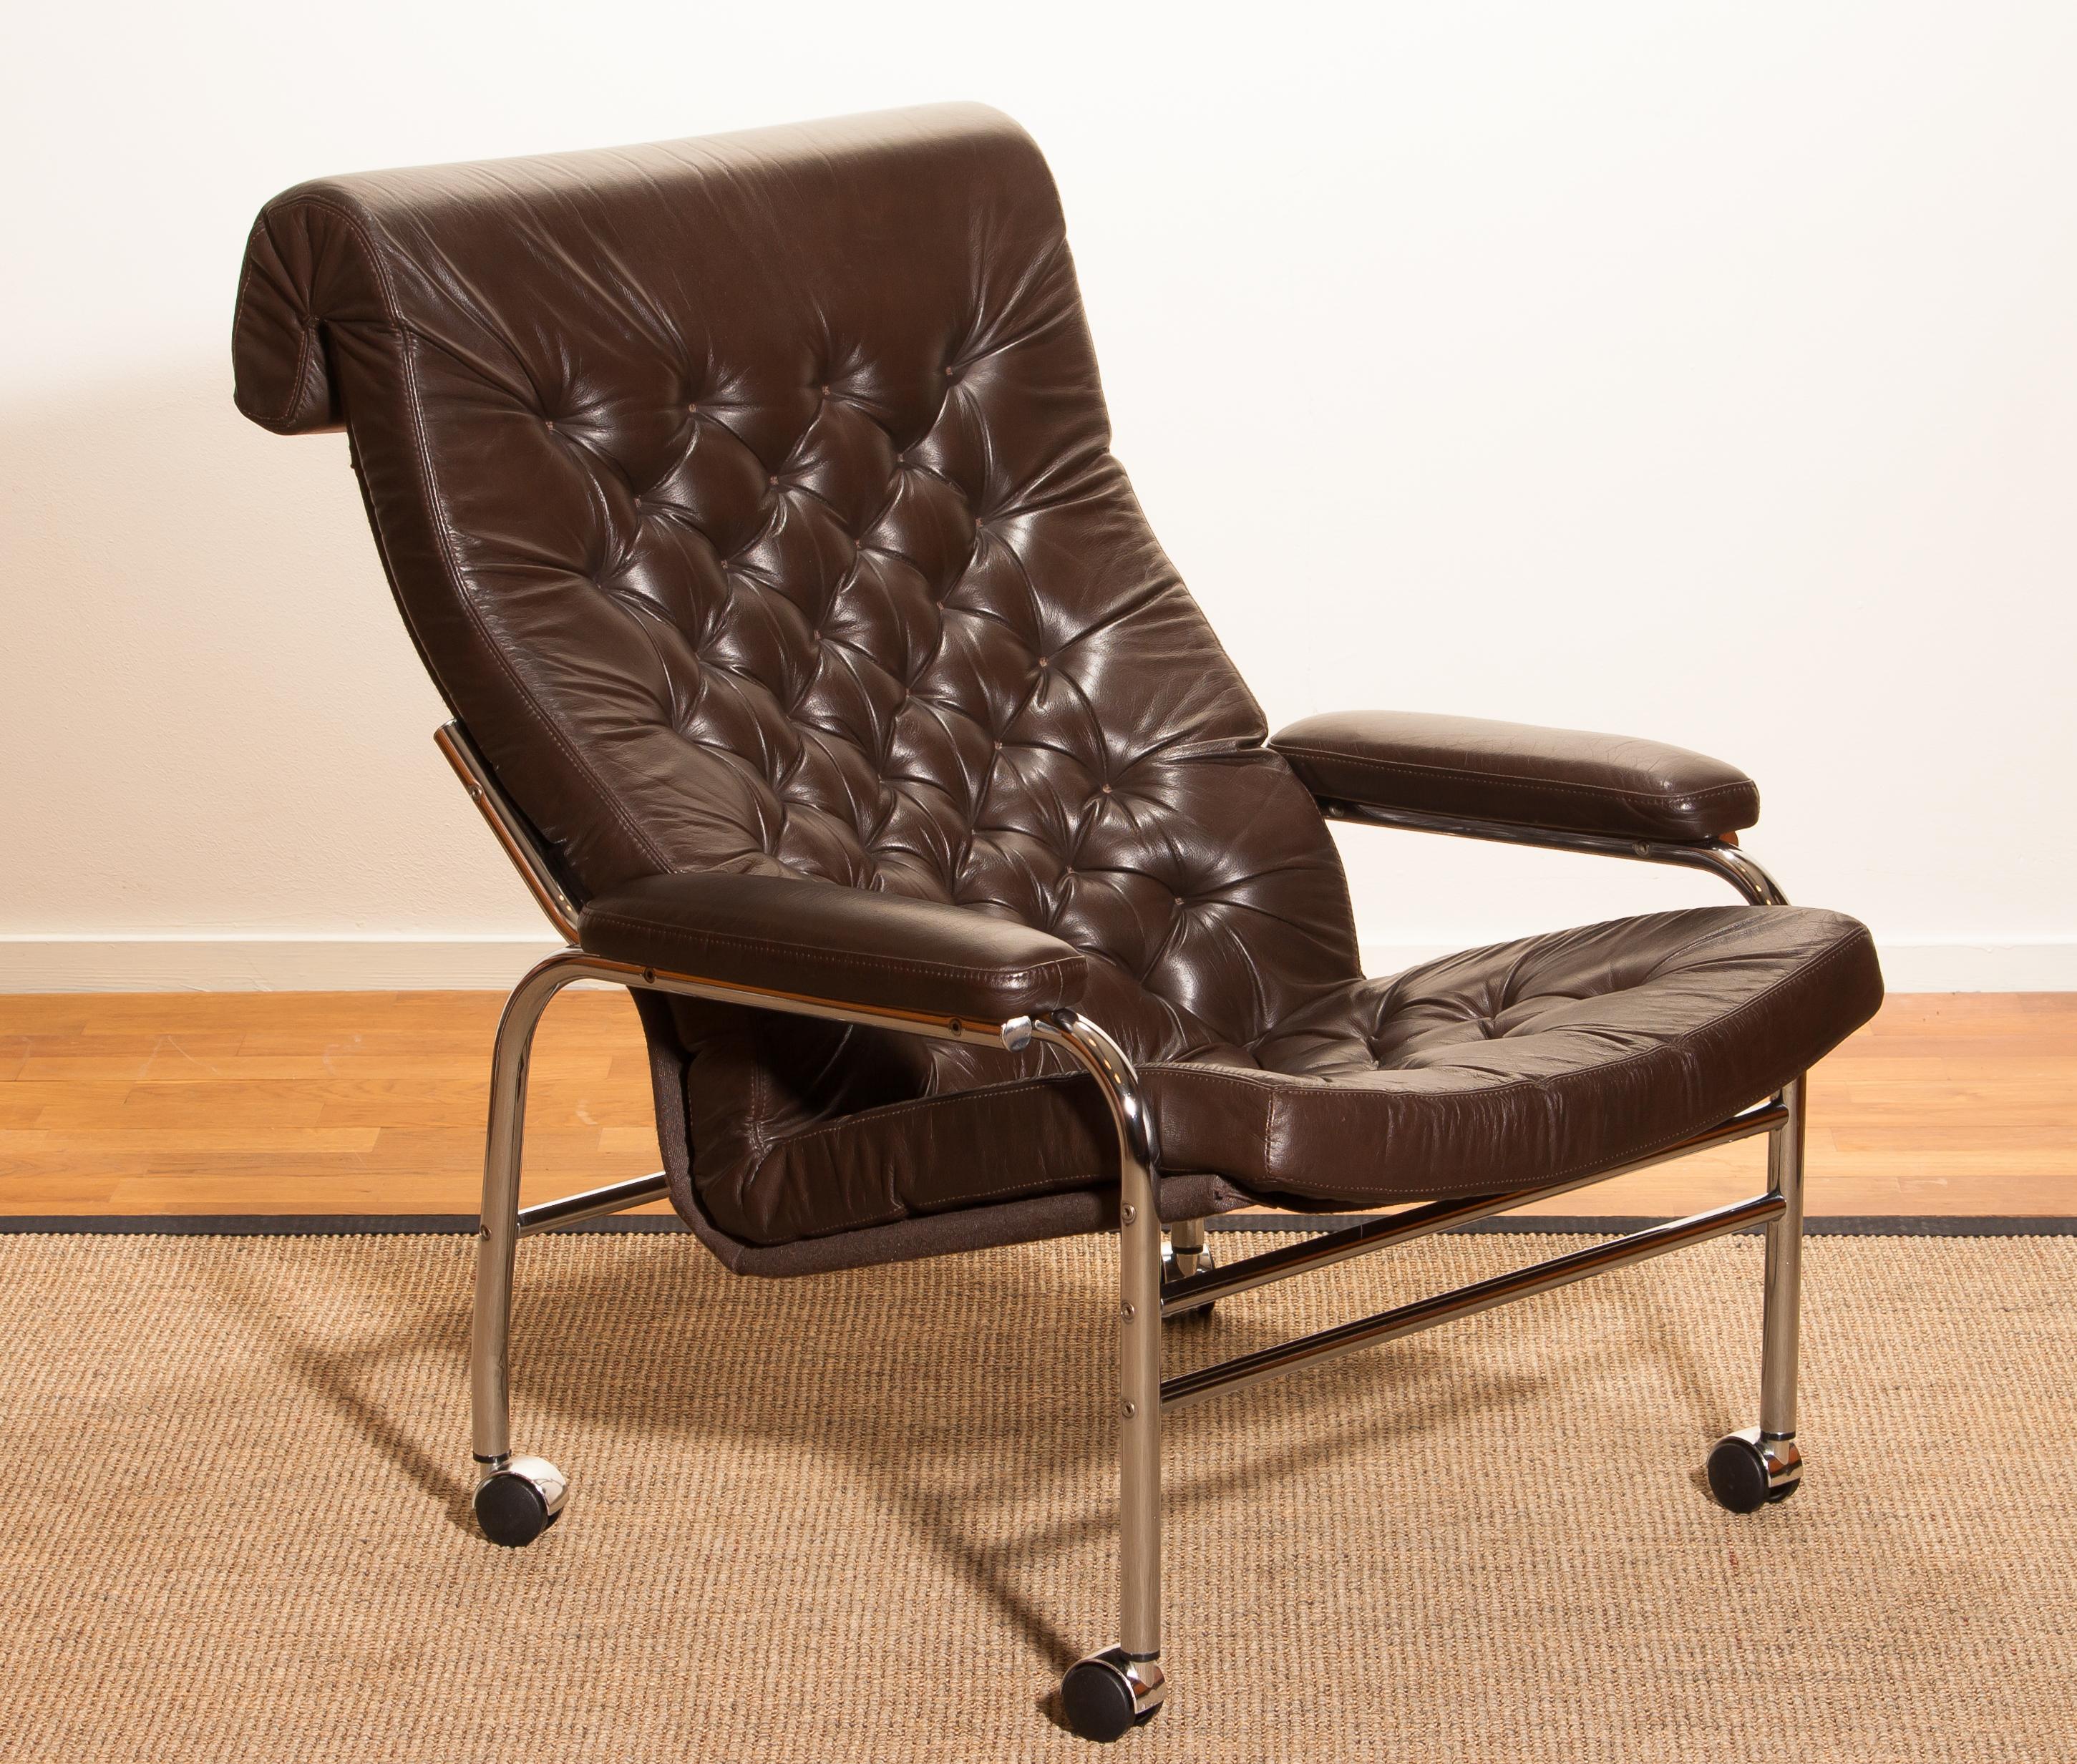 1970s, Leather and Chrome Lounge Chair 'Bore' by Noboru Nakamura 3